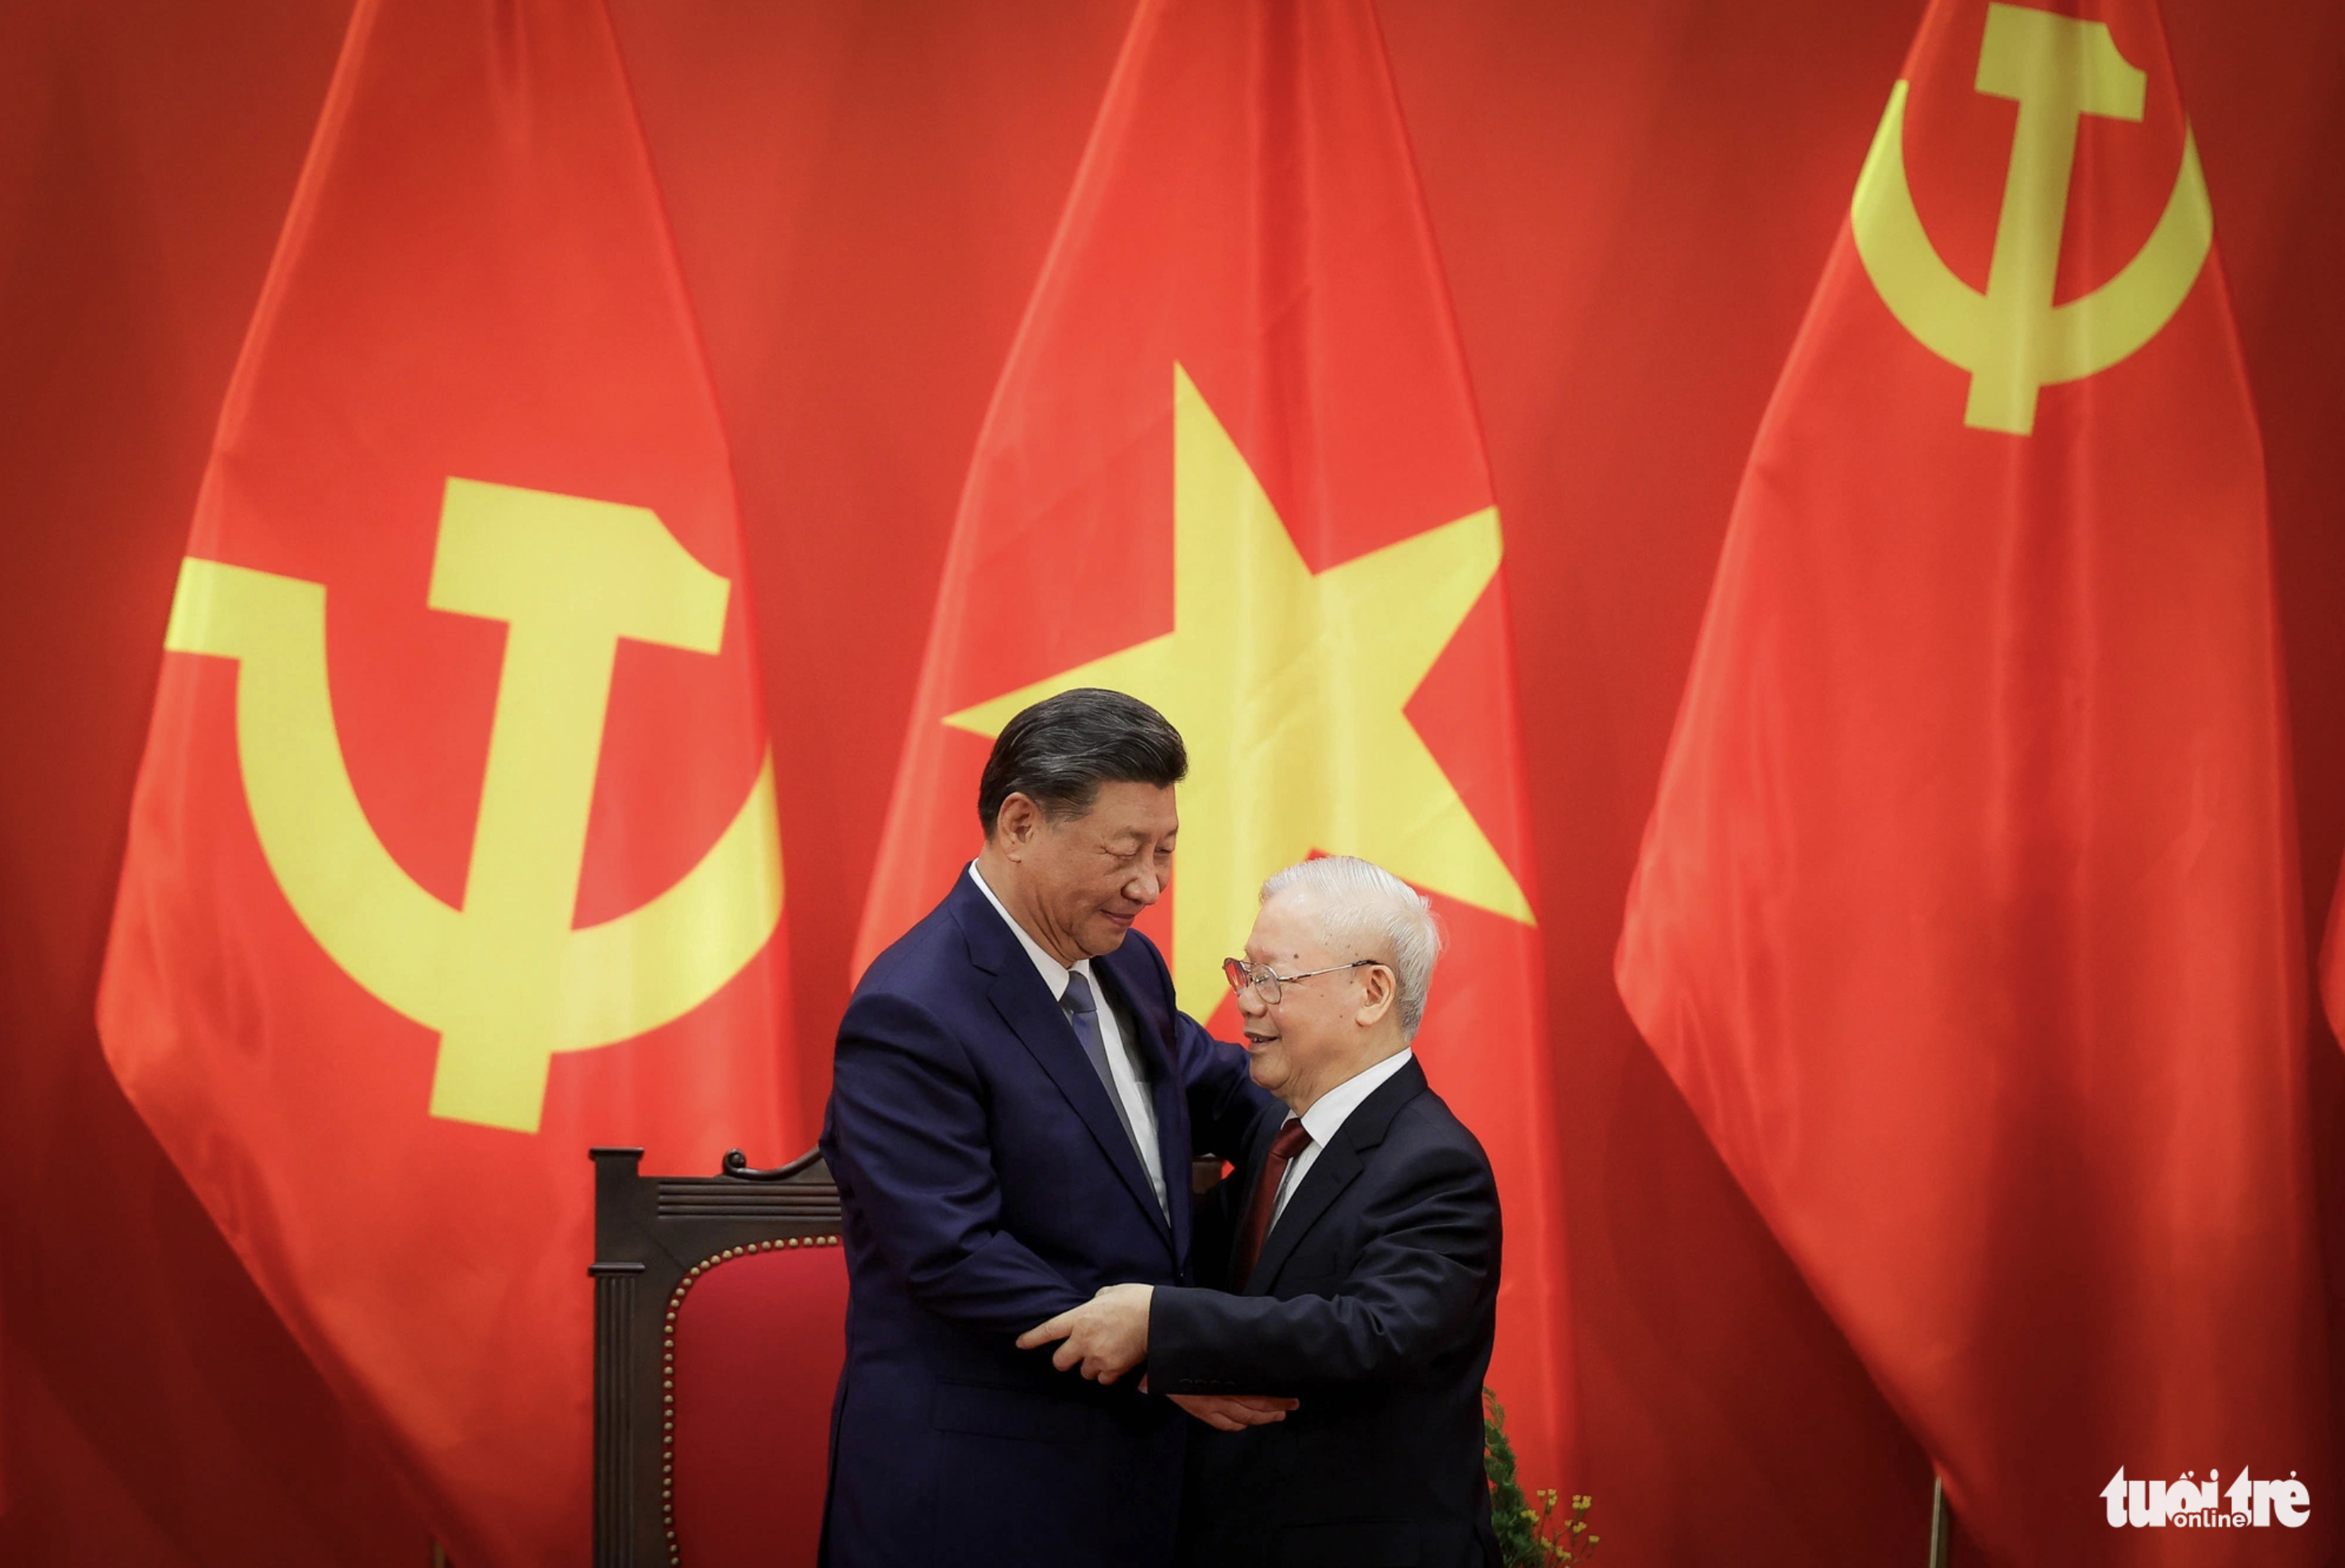 Vietnam’s Party chief Nguyen Phu Trong (R) hugs Chinese Party General Secretary and President Xi Jinping. Photo: Nguyen Khanh / Tuoi Tre